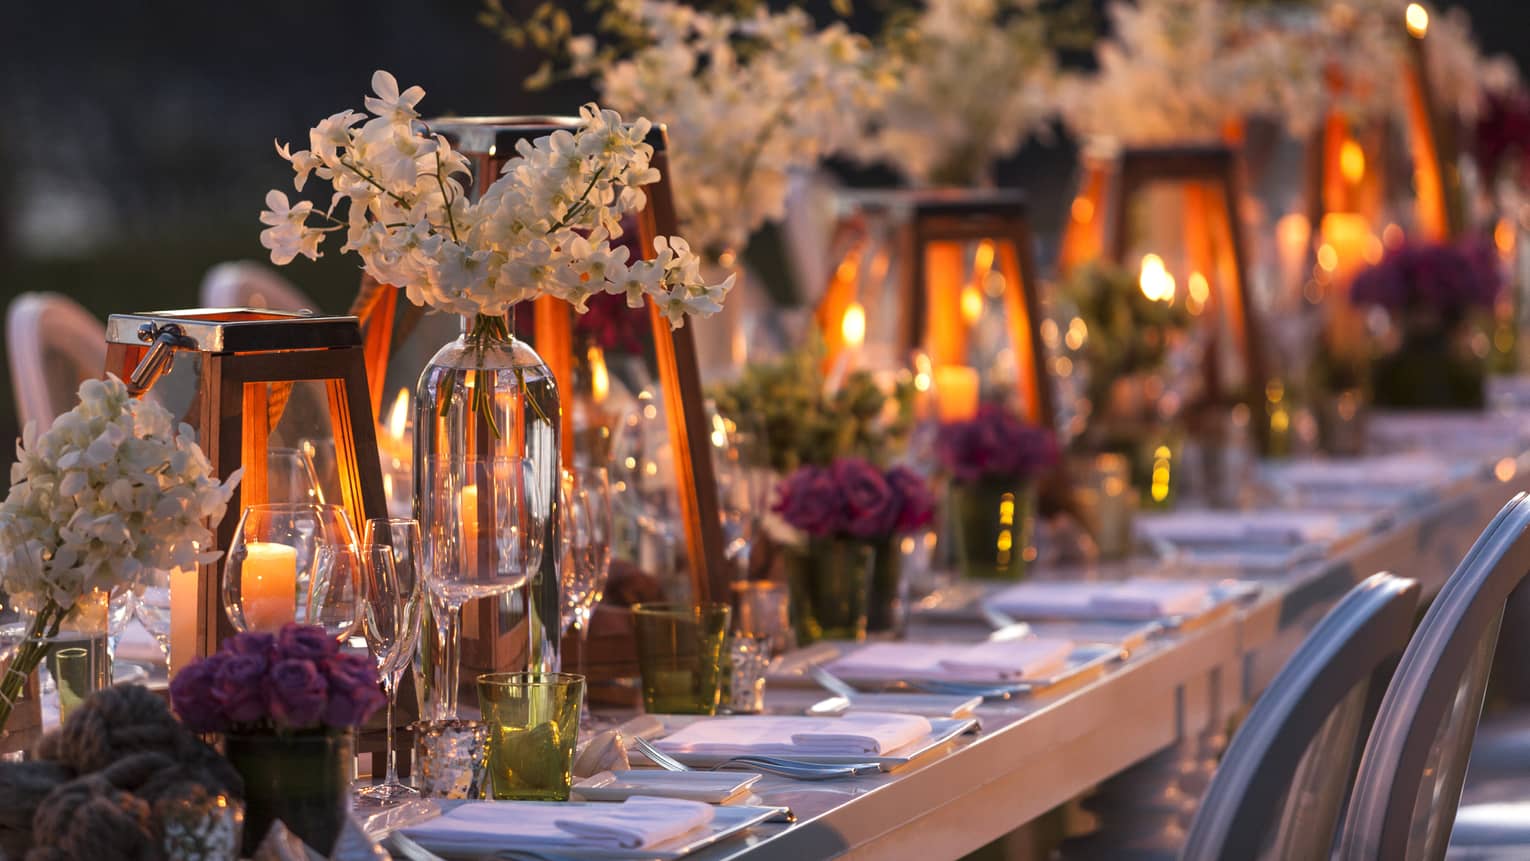 Close-up of candles in glowing lanterns, vases with flowers on long dining table at night